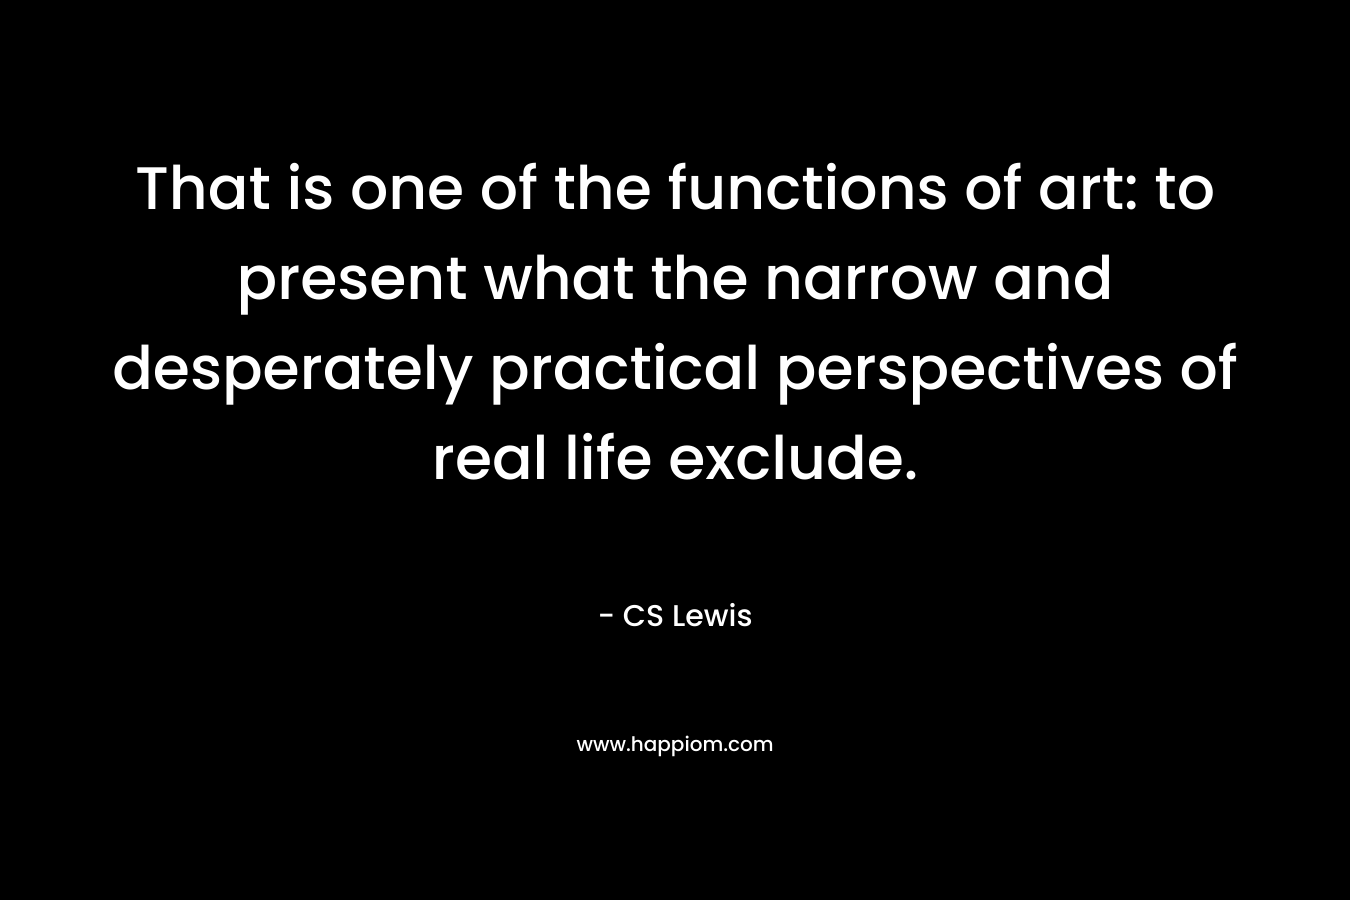 That is one of the functions of art: to present what the narrow and desperately practical perspectives of real life exclude. – CS Lewis